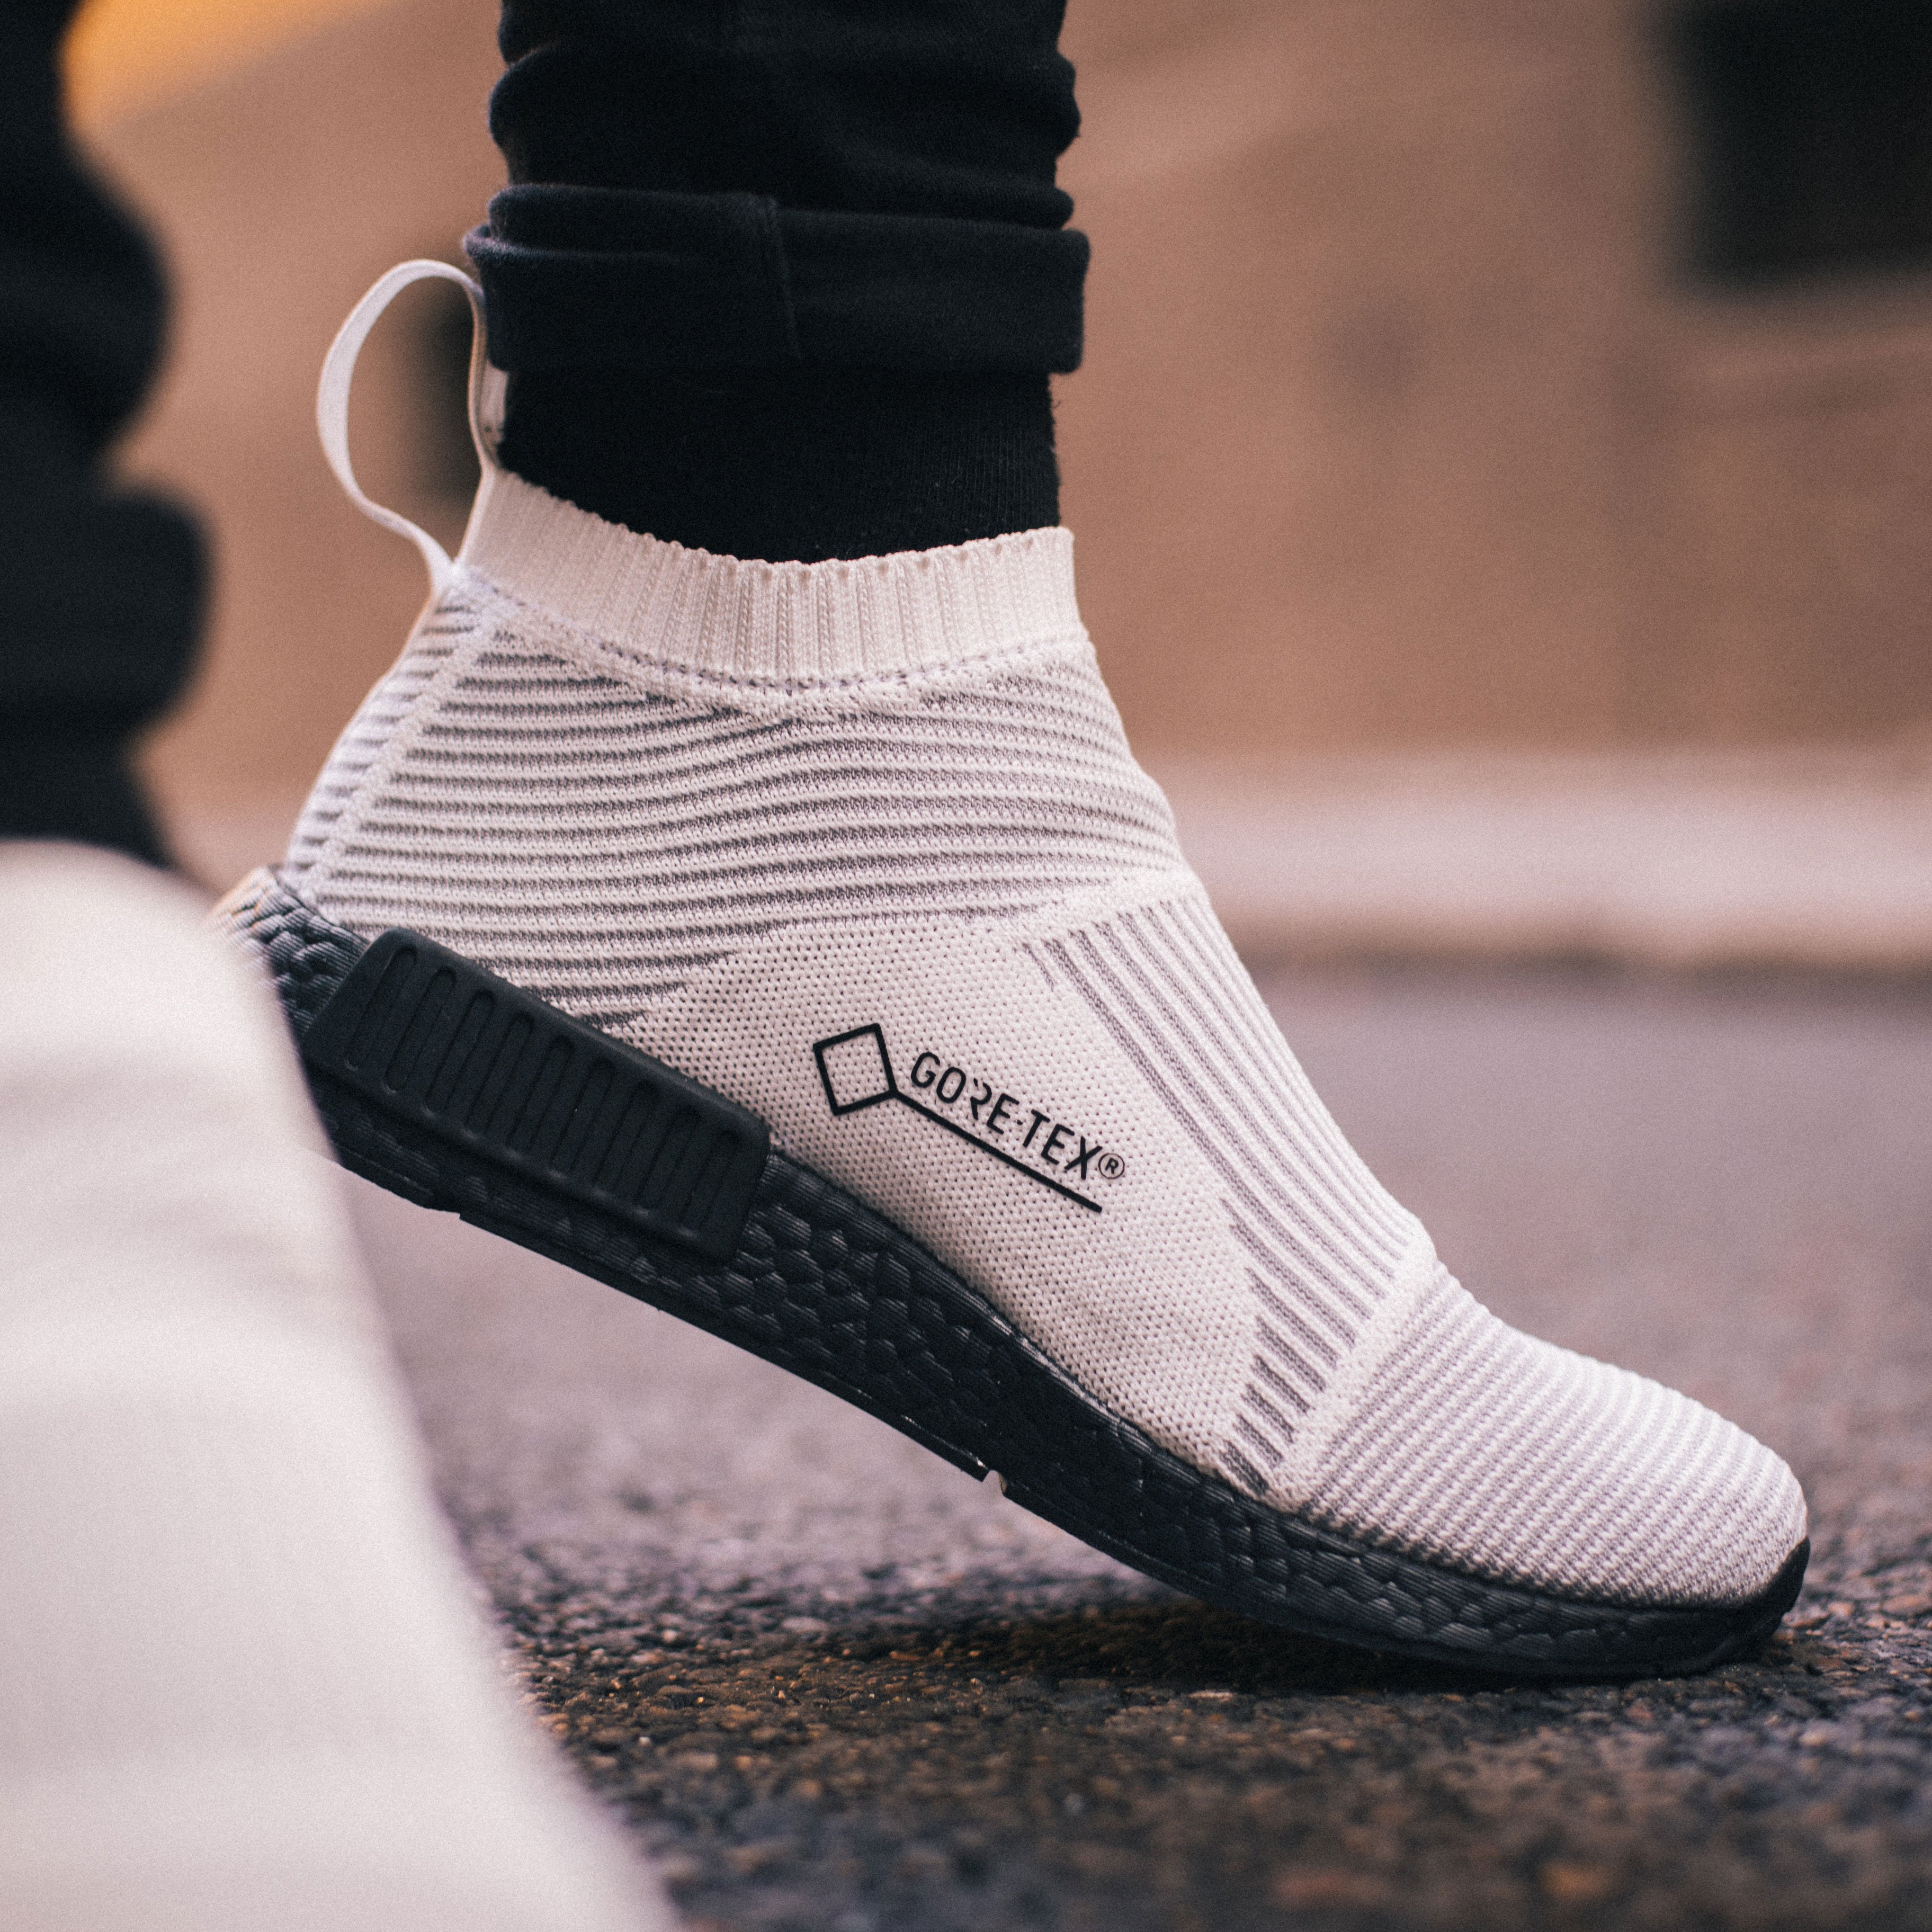 FOOTDISTRICT no Twitter: "adidas NMD CS1 "Gore-Tex" available now. Buy online: https://t.co/HV0upTazTM" /